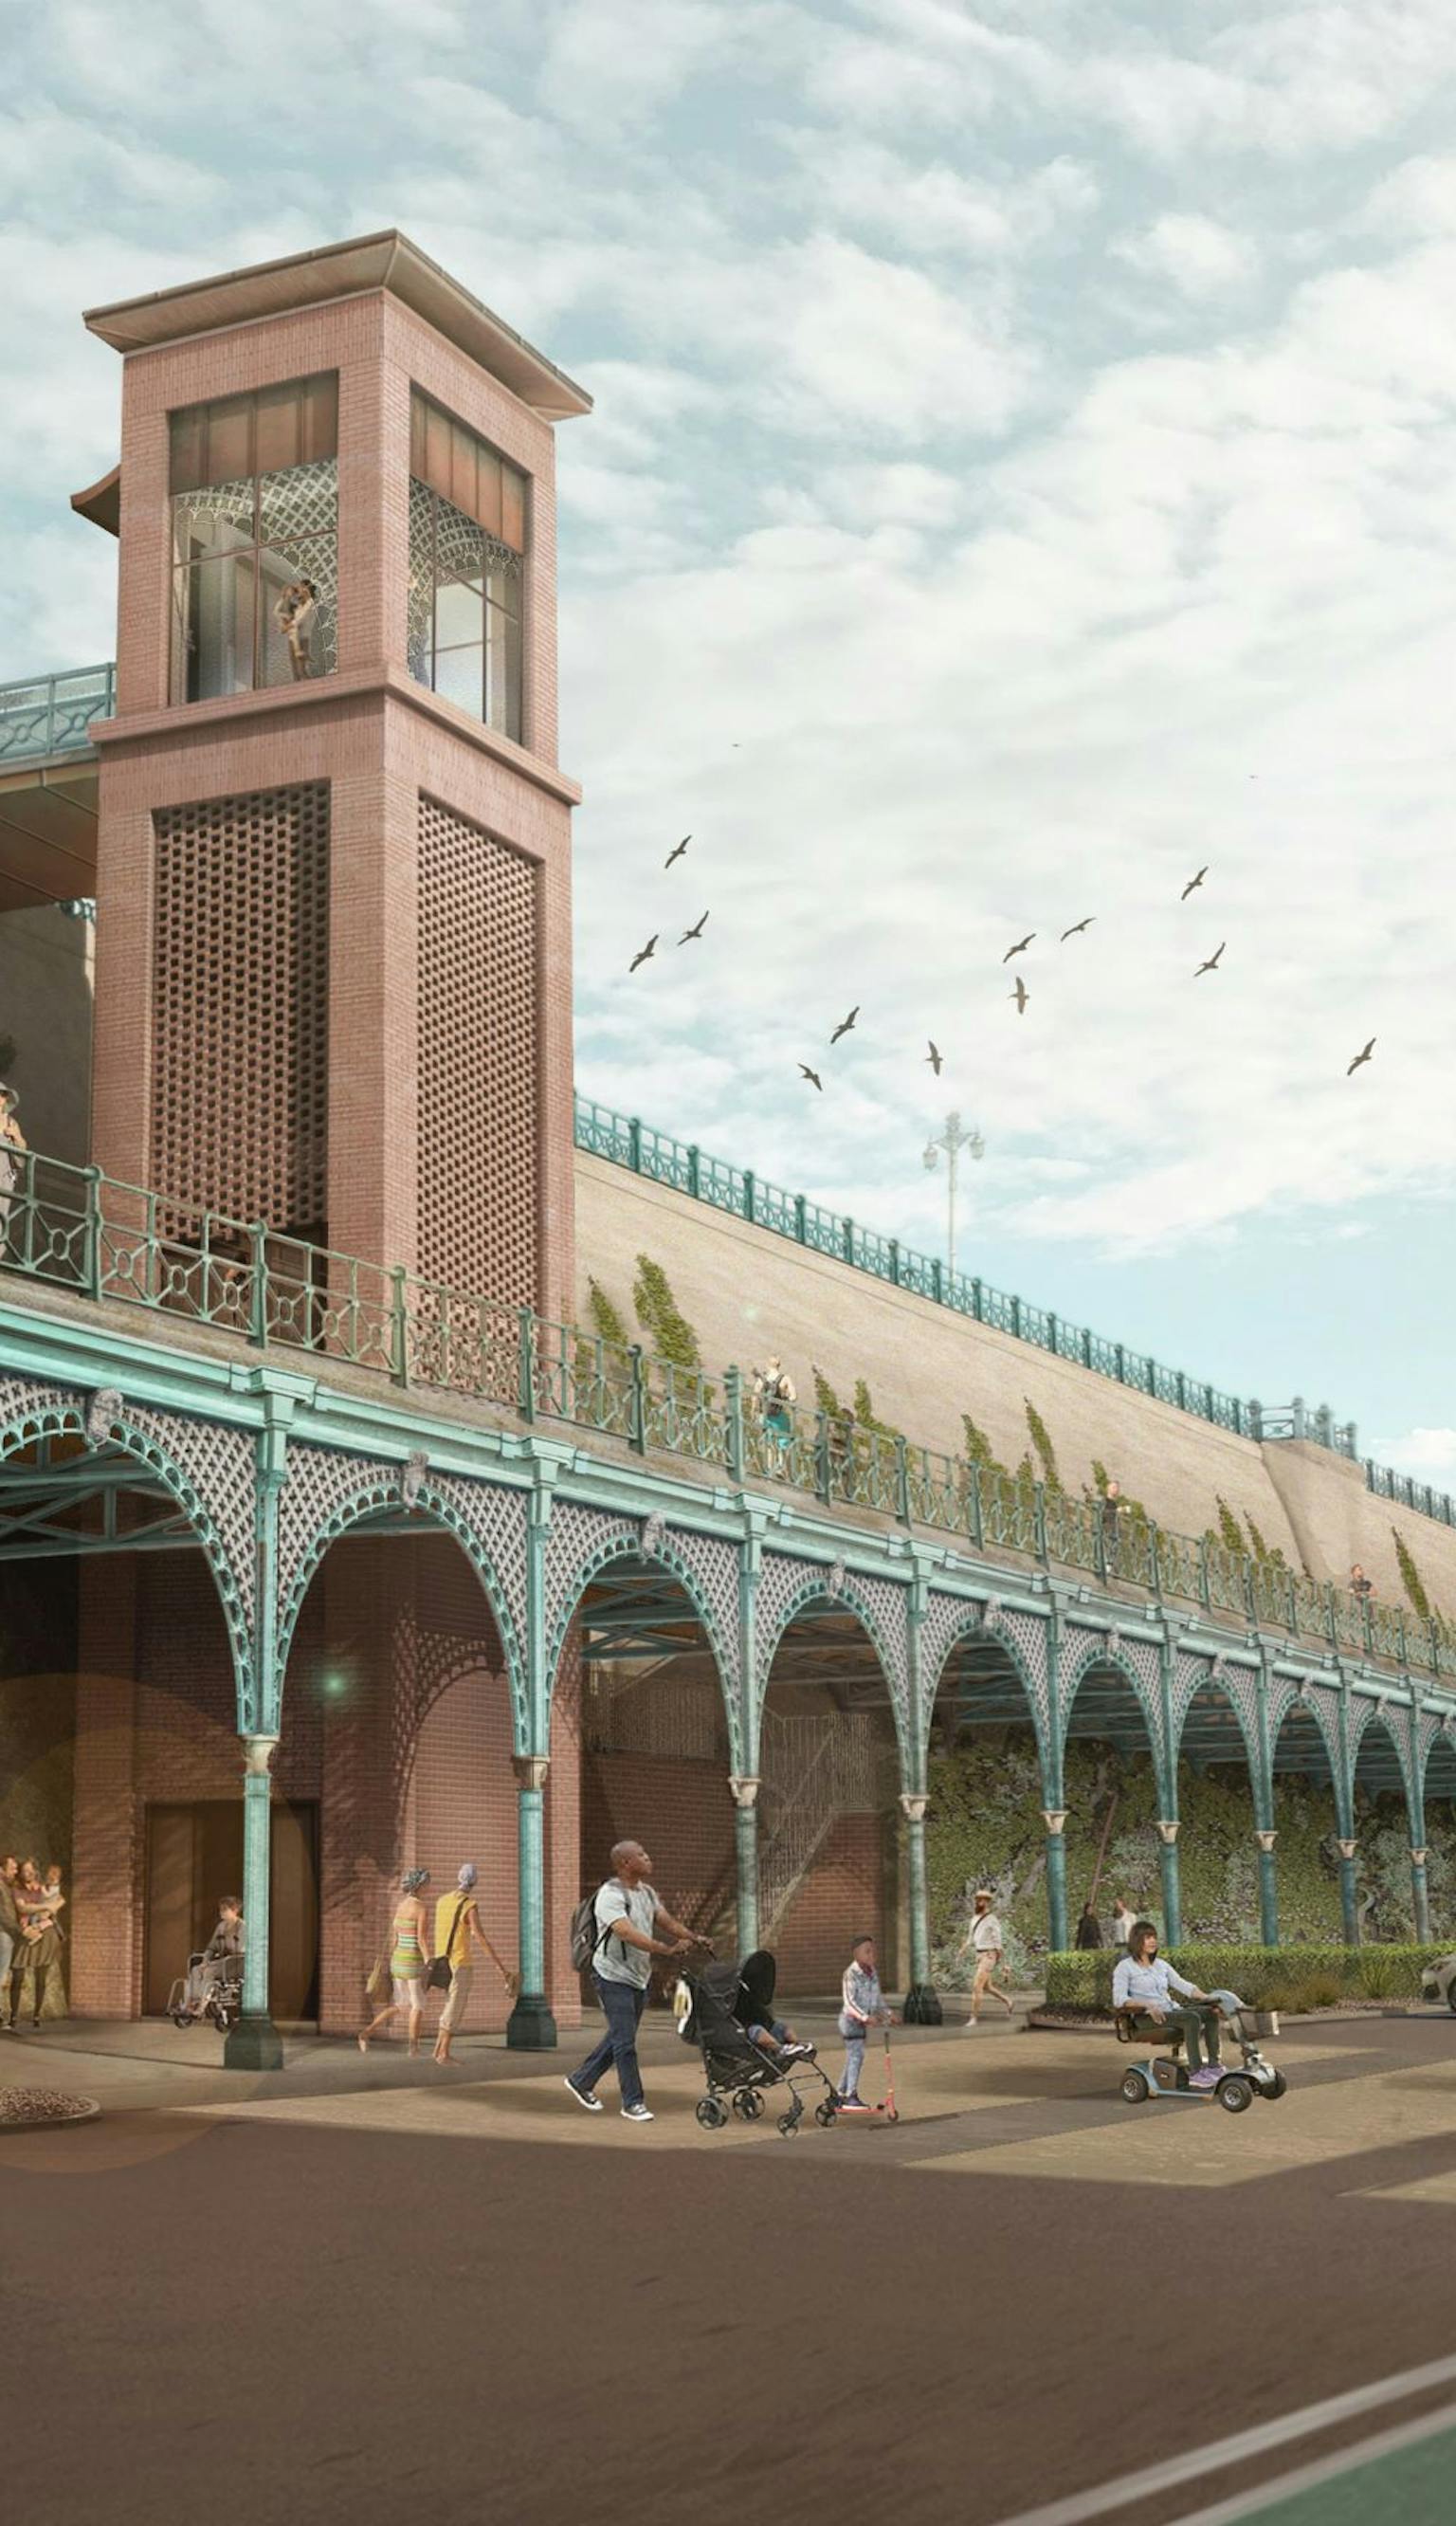 A CGI visualisation of the Madeira Terrace scheme by Purcell